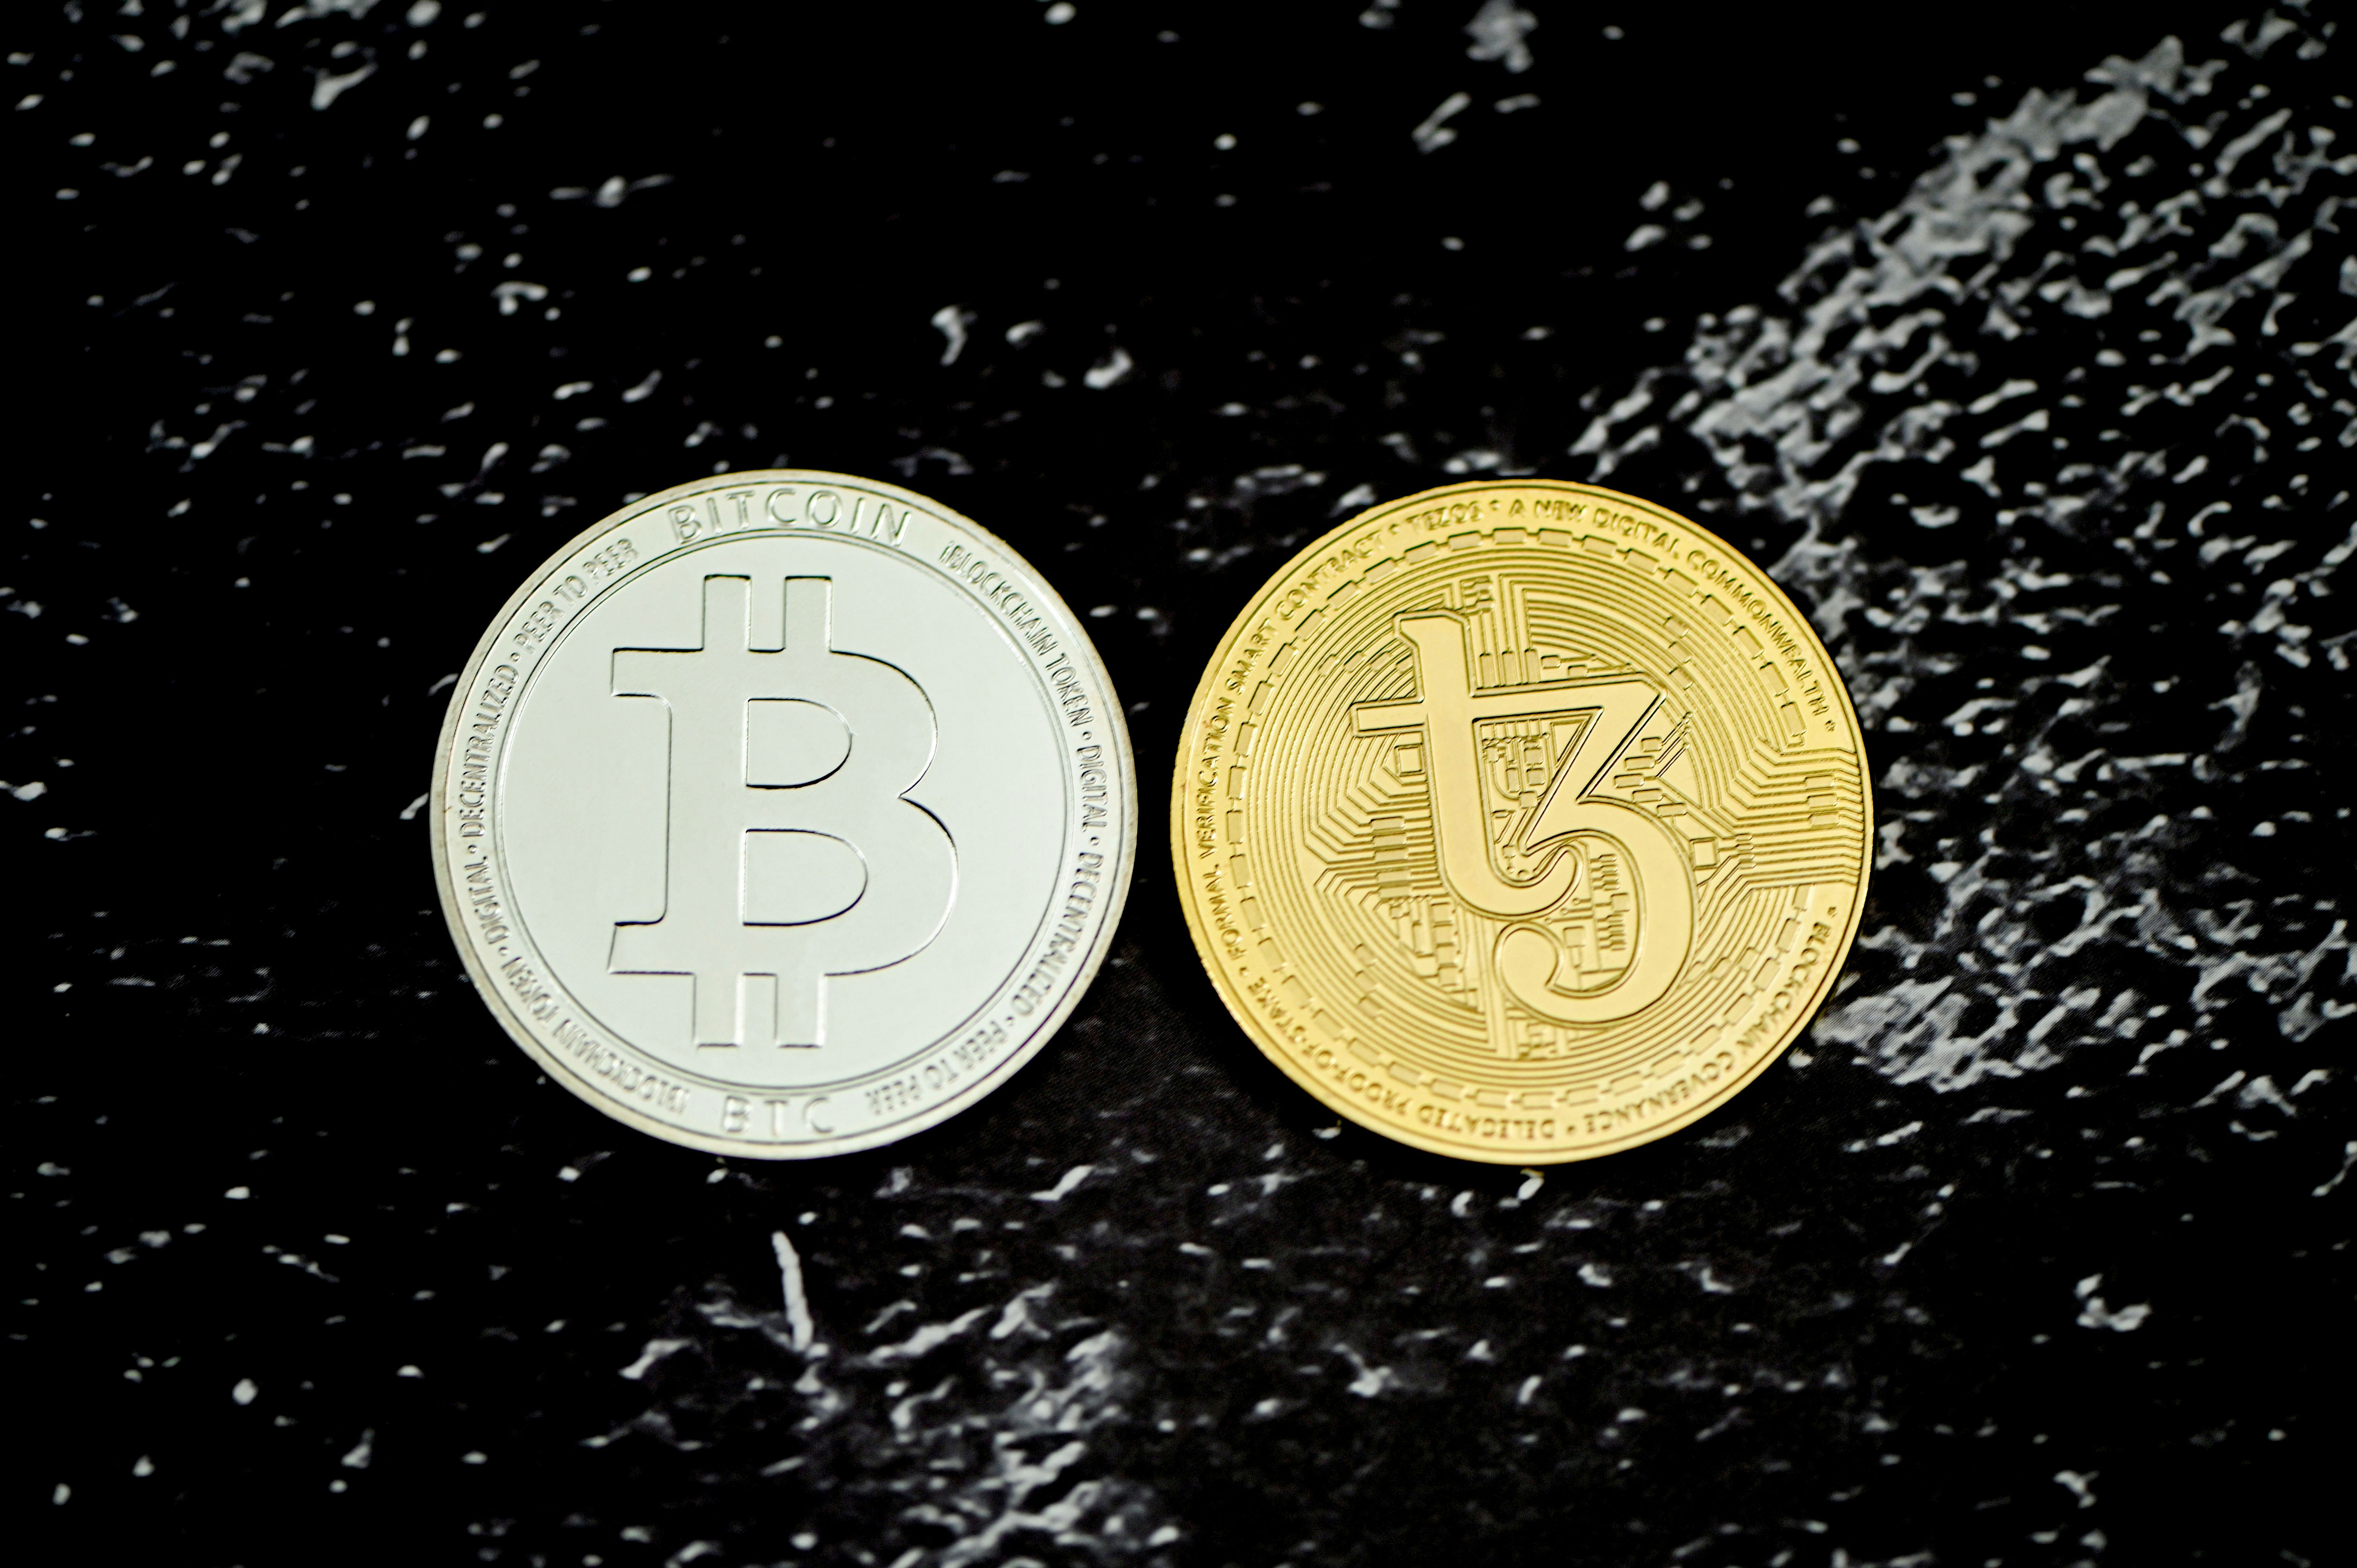 Bitcoin and Tezos coin are together on a marble background